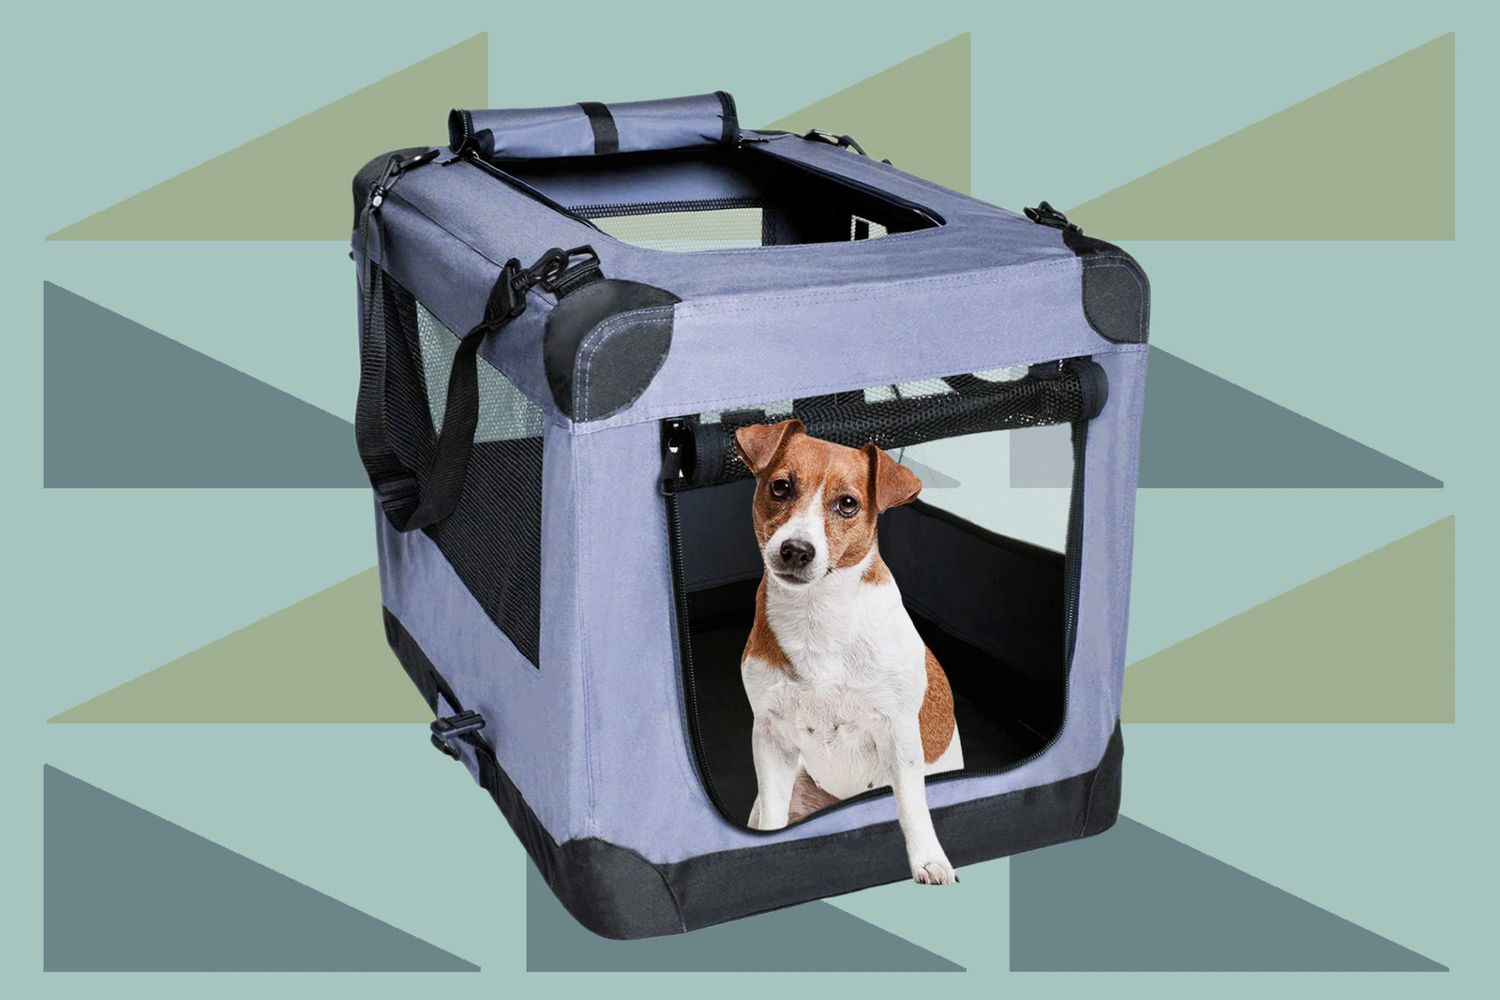 New 20" Portable Travel Soft-Sided Crate Carrier Kennel For Small Animal 115 